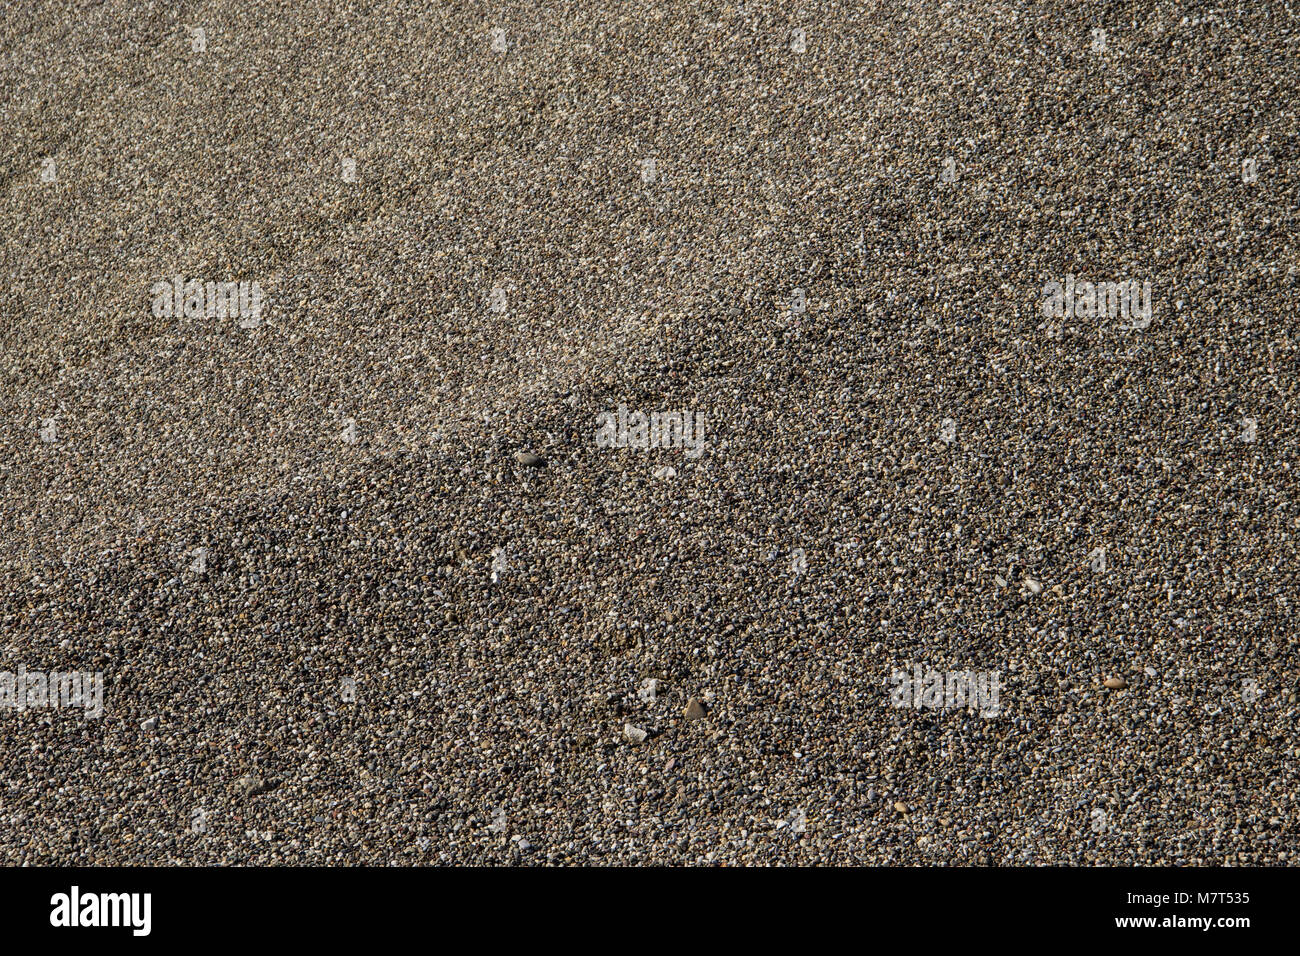 Construction Aggregate And Gravel Dumps Stock Photo